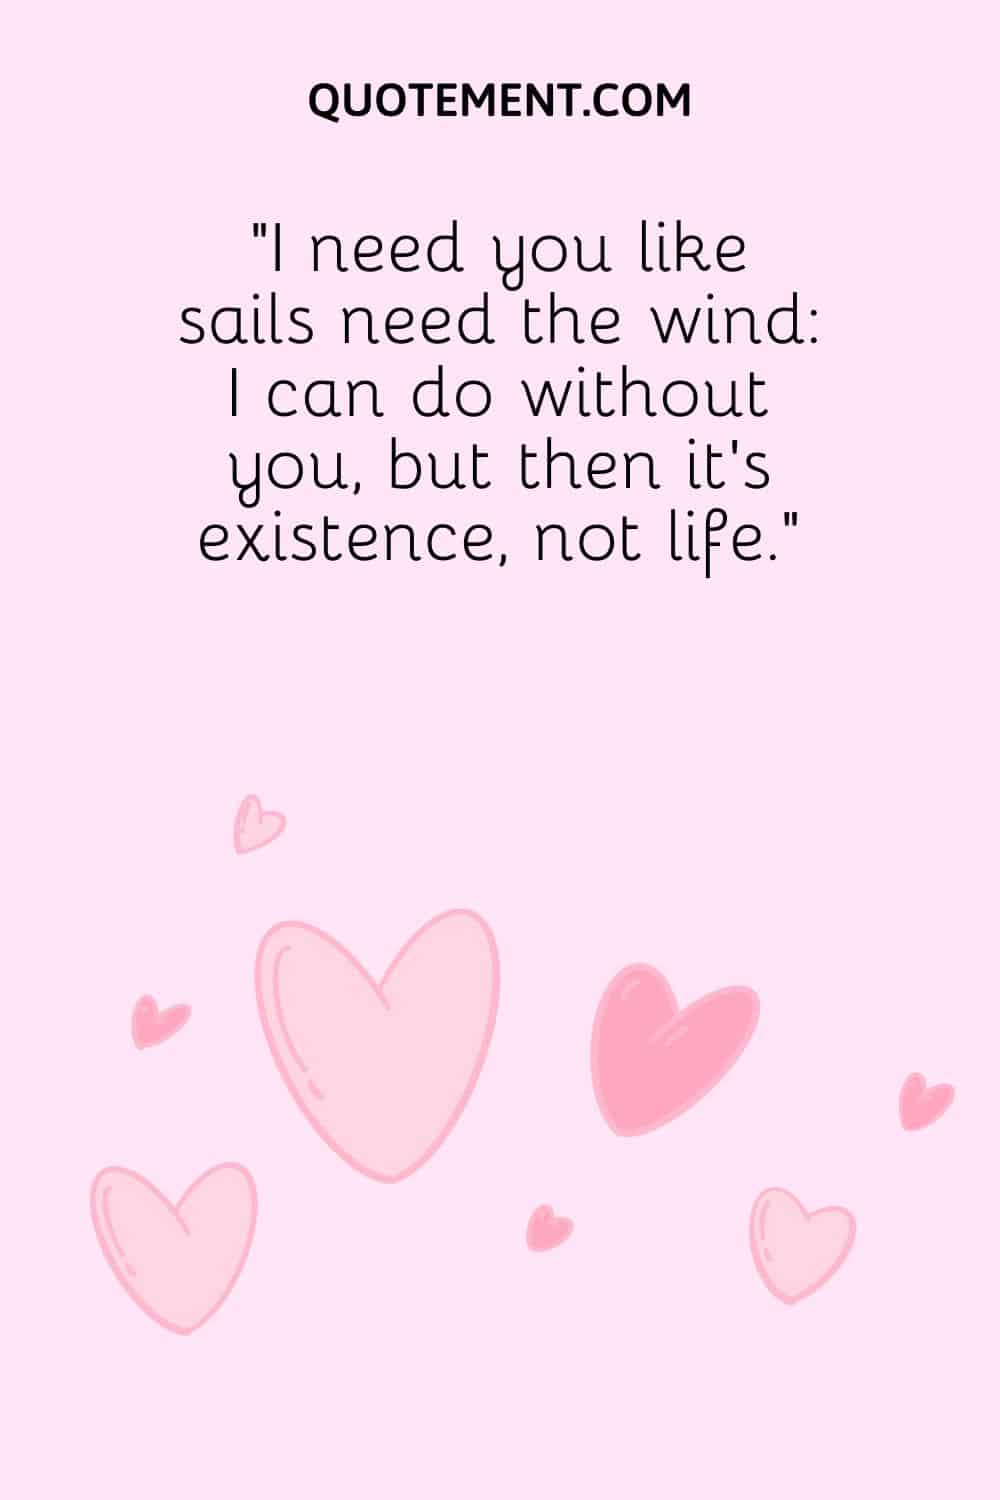 “I need you like sails need the wind I can do without you, but then it’s existence, not life.”